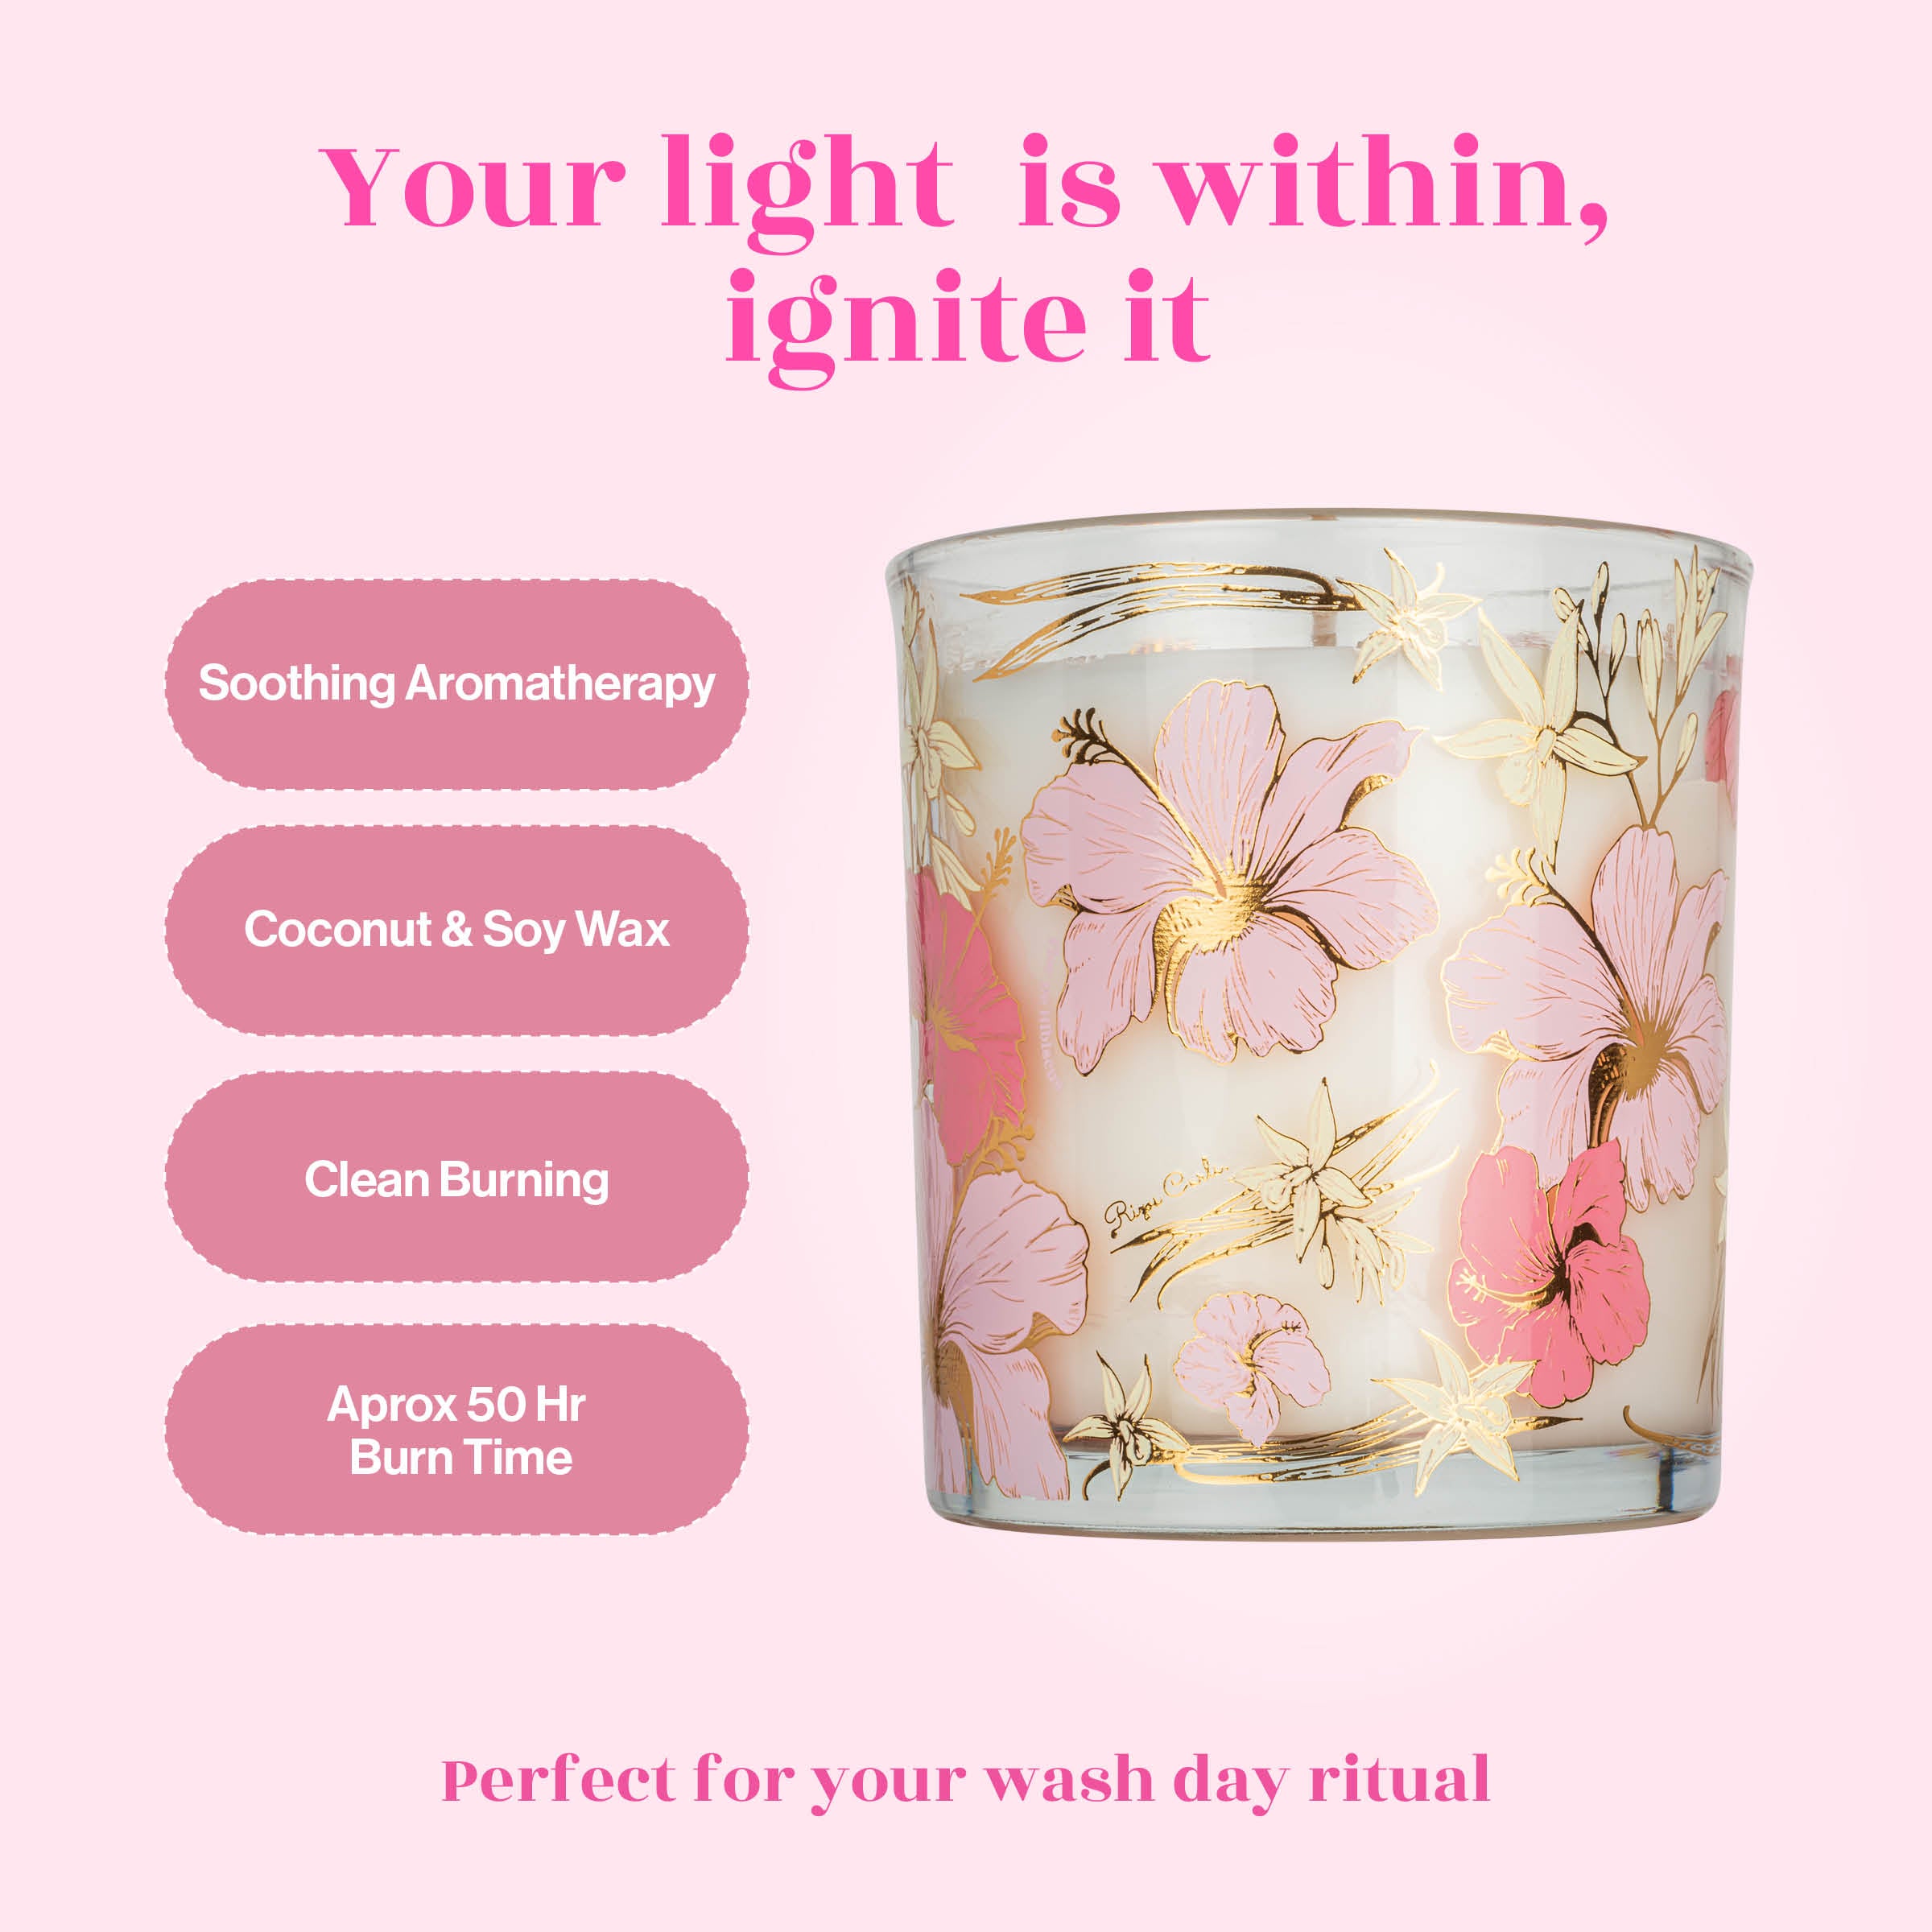 Buy Wholesale China New Design Scented Soy Wax Glass Jar Candle Holder 4 Oz  Pink Candle Glass Jars For Candle Making & 4 Oz Pink Candle Glass Jars For  Candle Making at